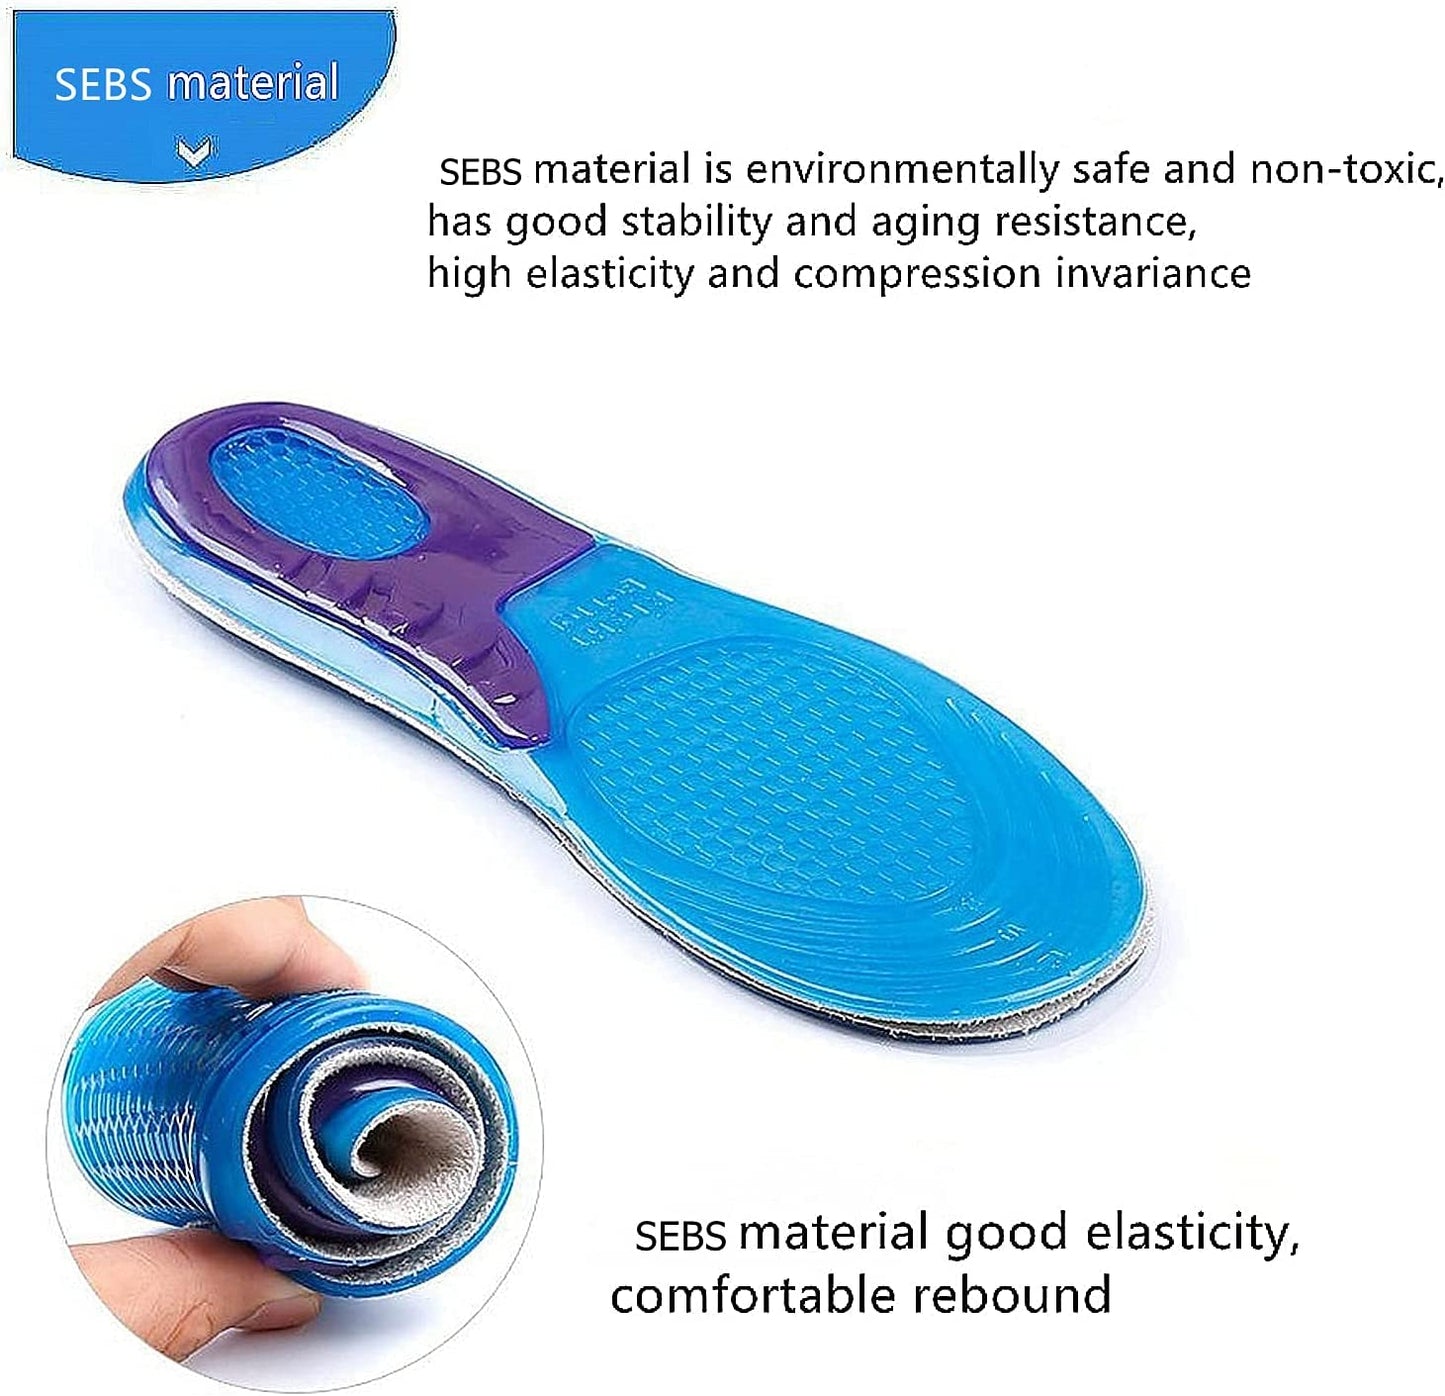 Gel Insoles All Day Comfort - Shoe Inserts Women - Full Length Orthotics - Cushion Soles for Heels, Arch Support, Plantar Fasciitis, Massaging Flat Feet